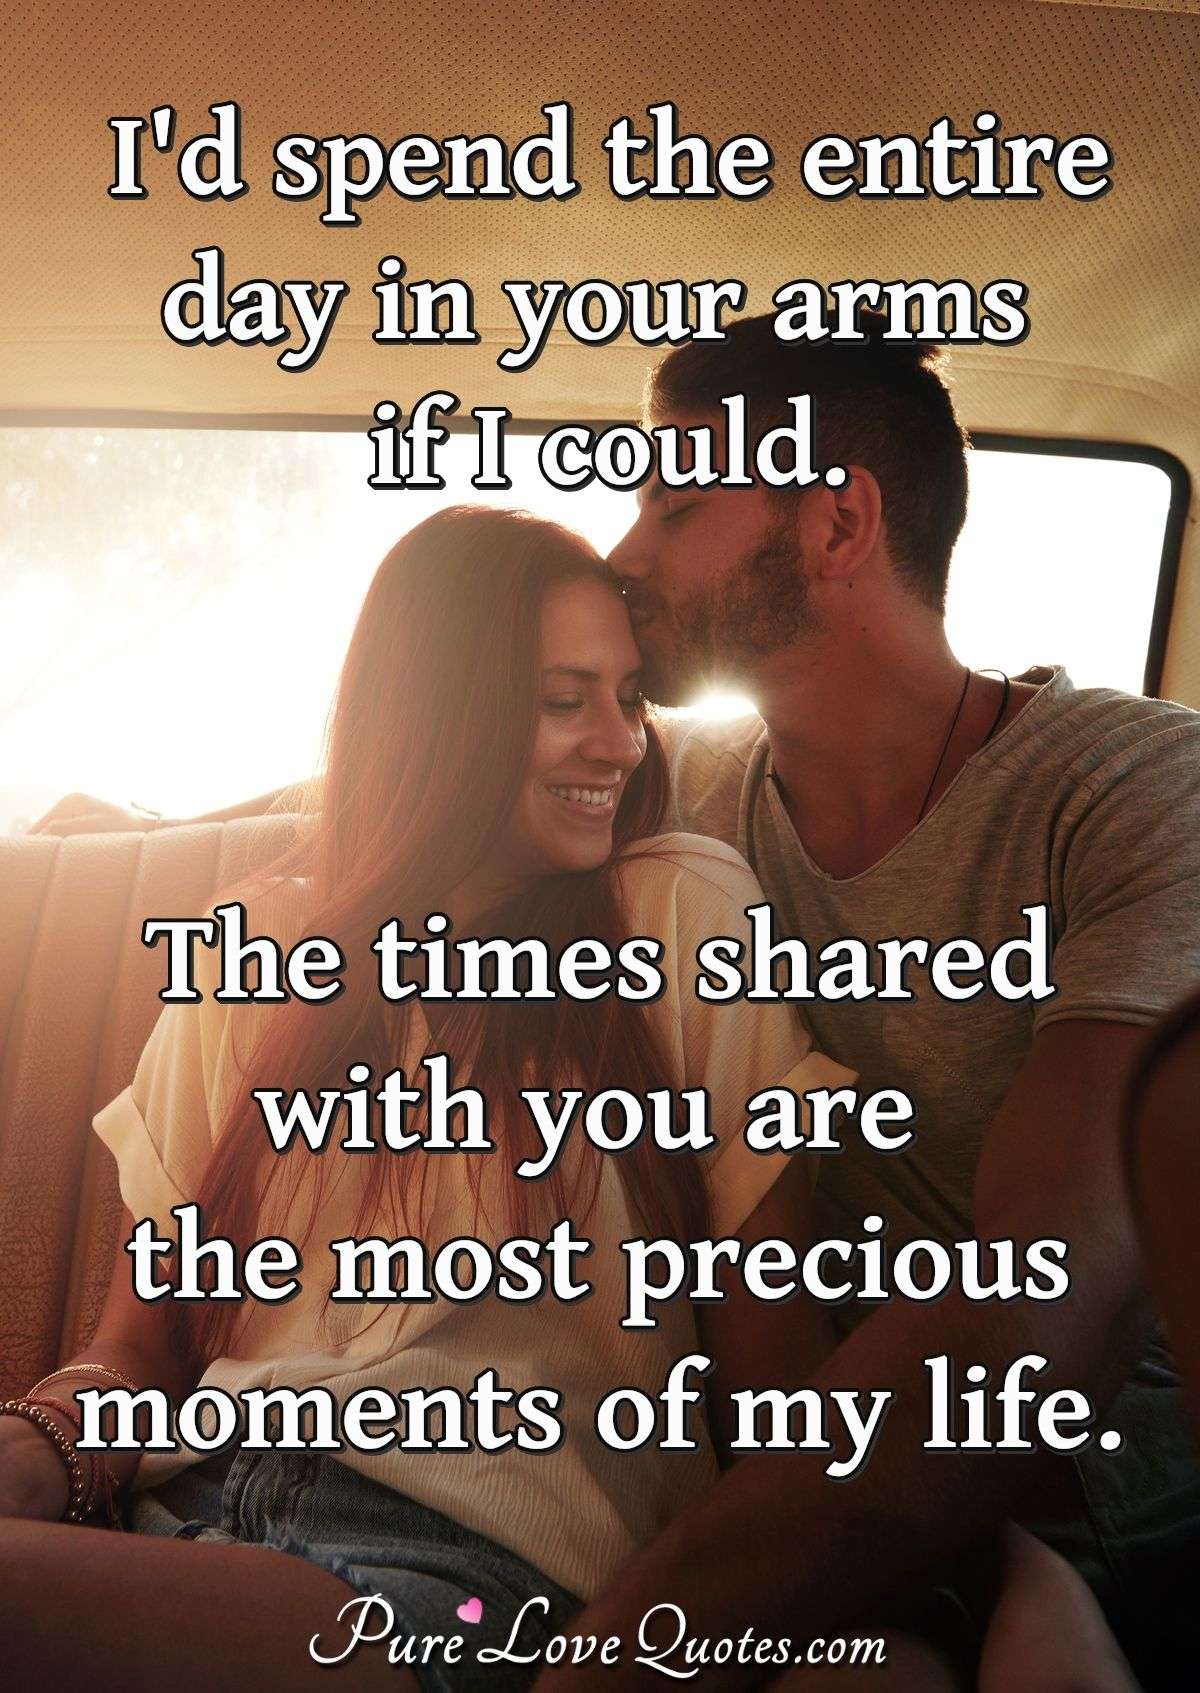 I'd spend the entire day in your arms if I could.  The times shared with you are the most precious moments of my life. - PureLoveQuotes.com